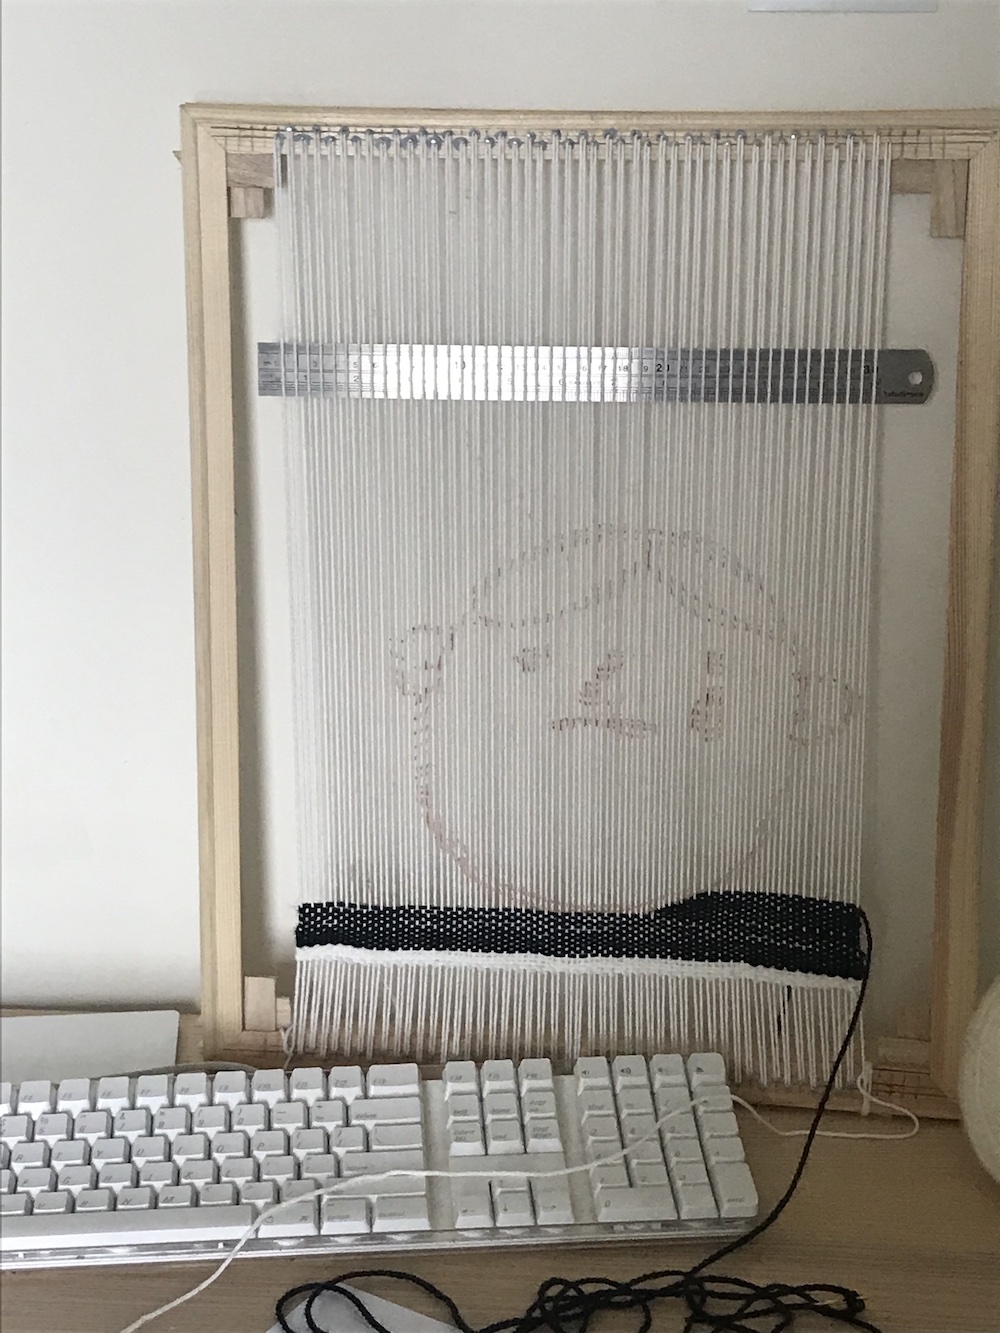 a loom with the weft being filled in in black and a cartoon of a crying face drawn as a guide on the warp